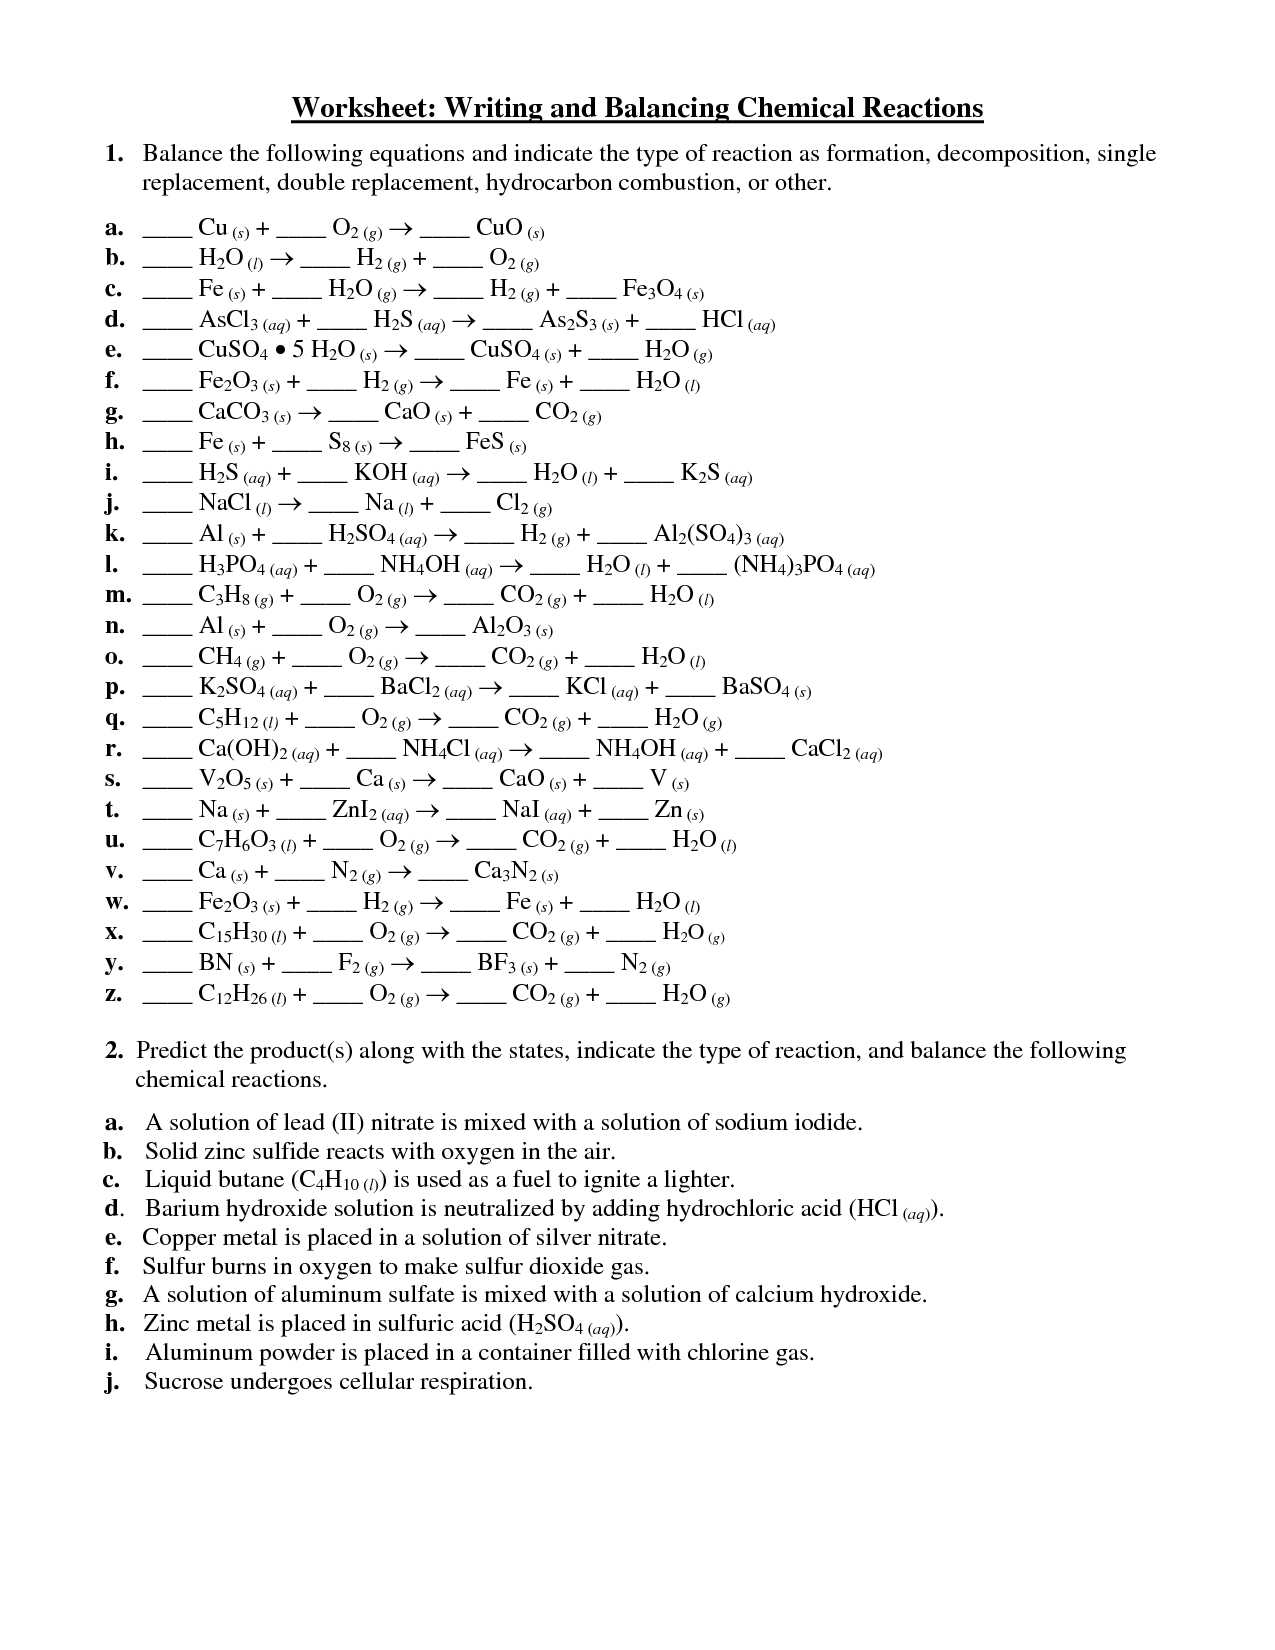 Balancing Chemical Reactions Worksheet Answers together with Types Chemical Reactions Classifying Chemical Reactions